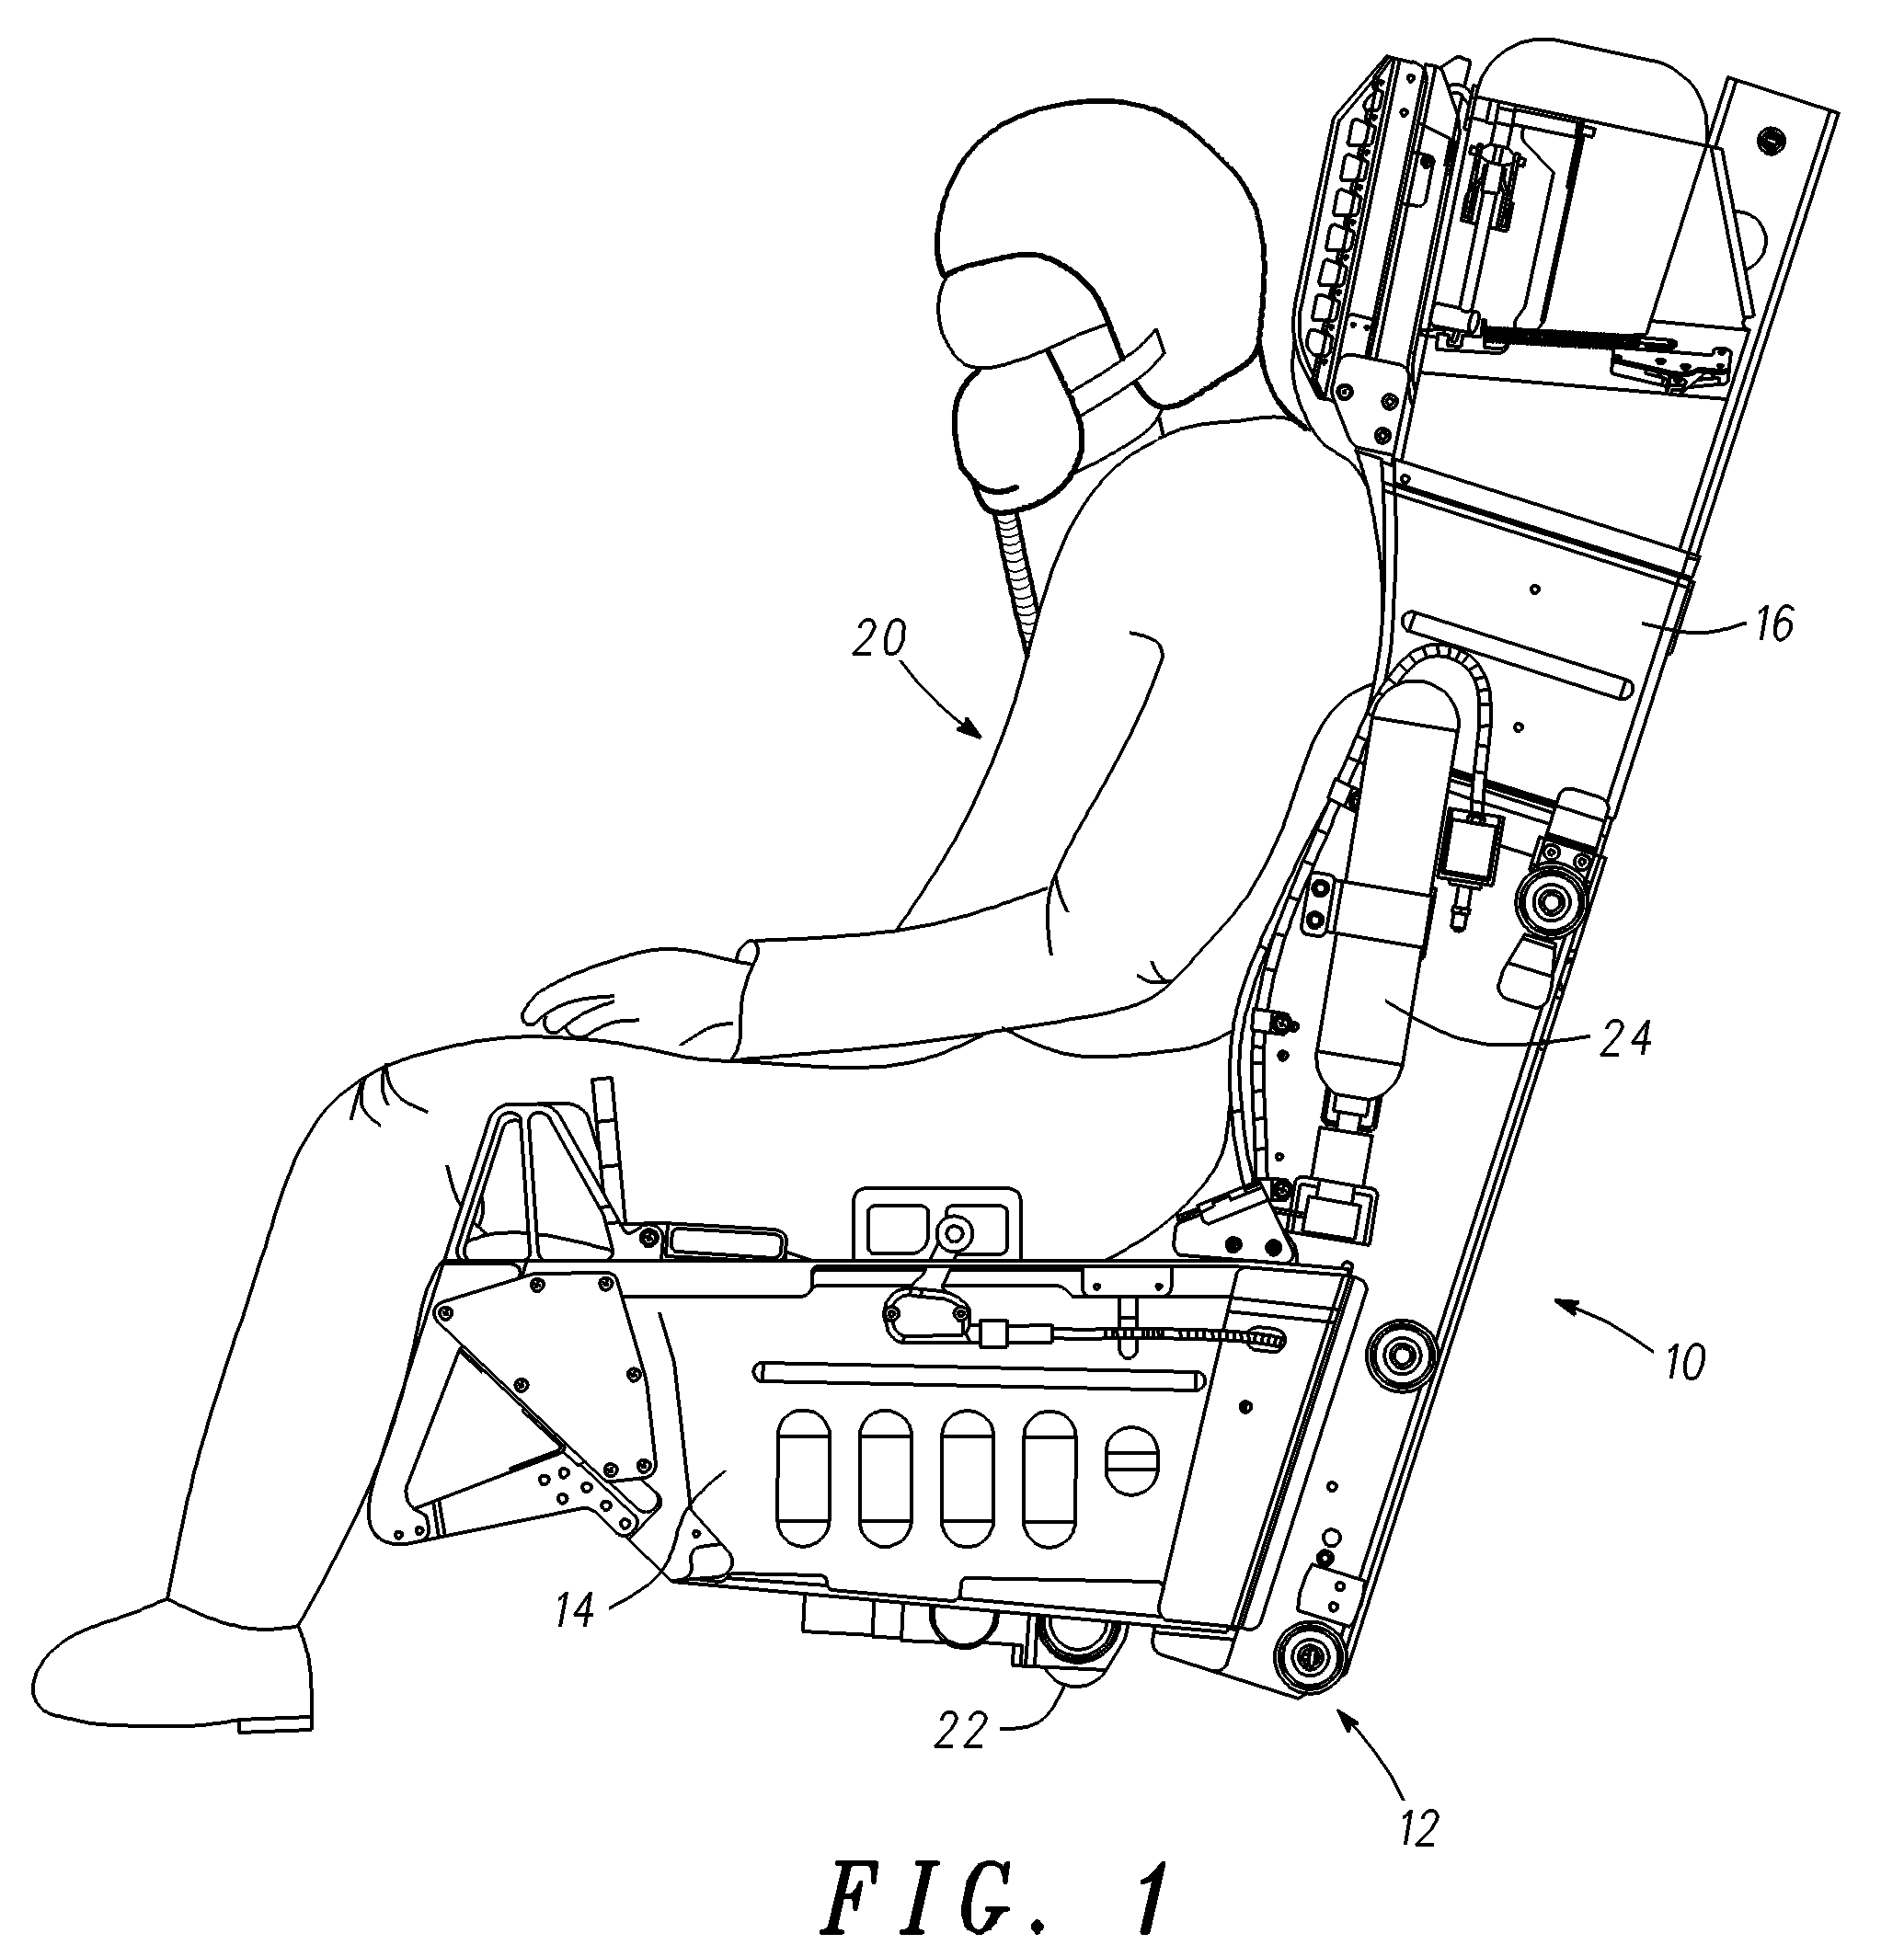 Aircraft ejection seat with movable headrest